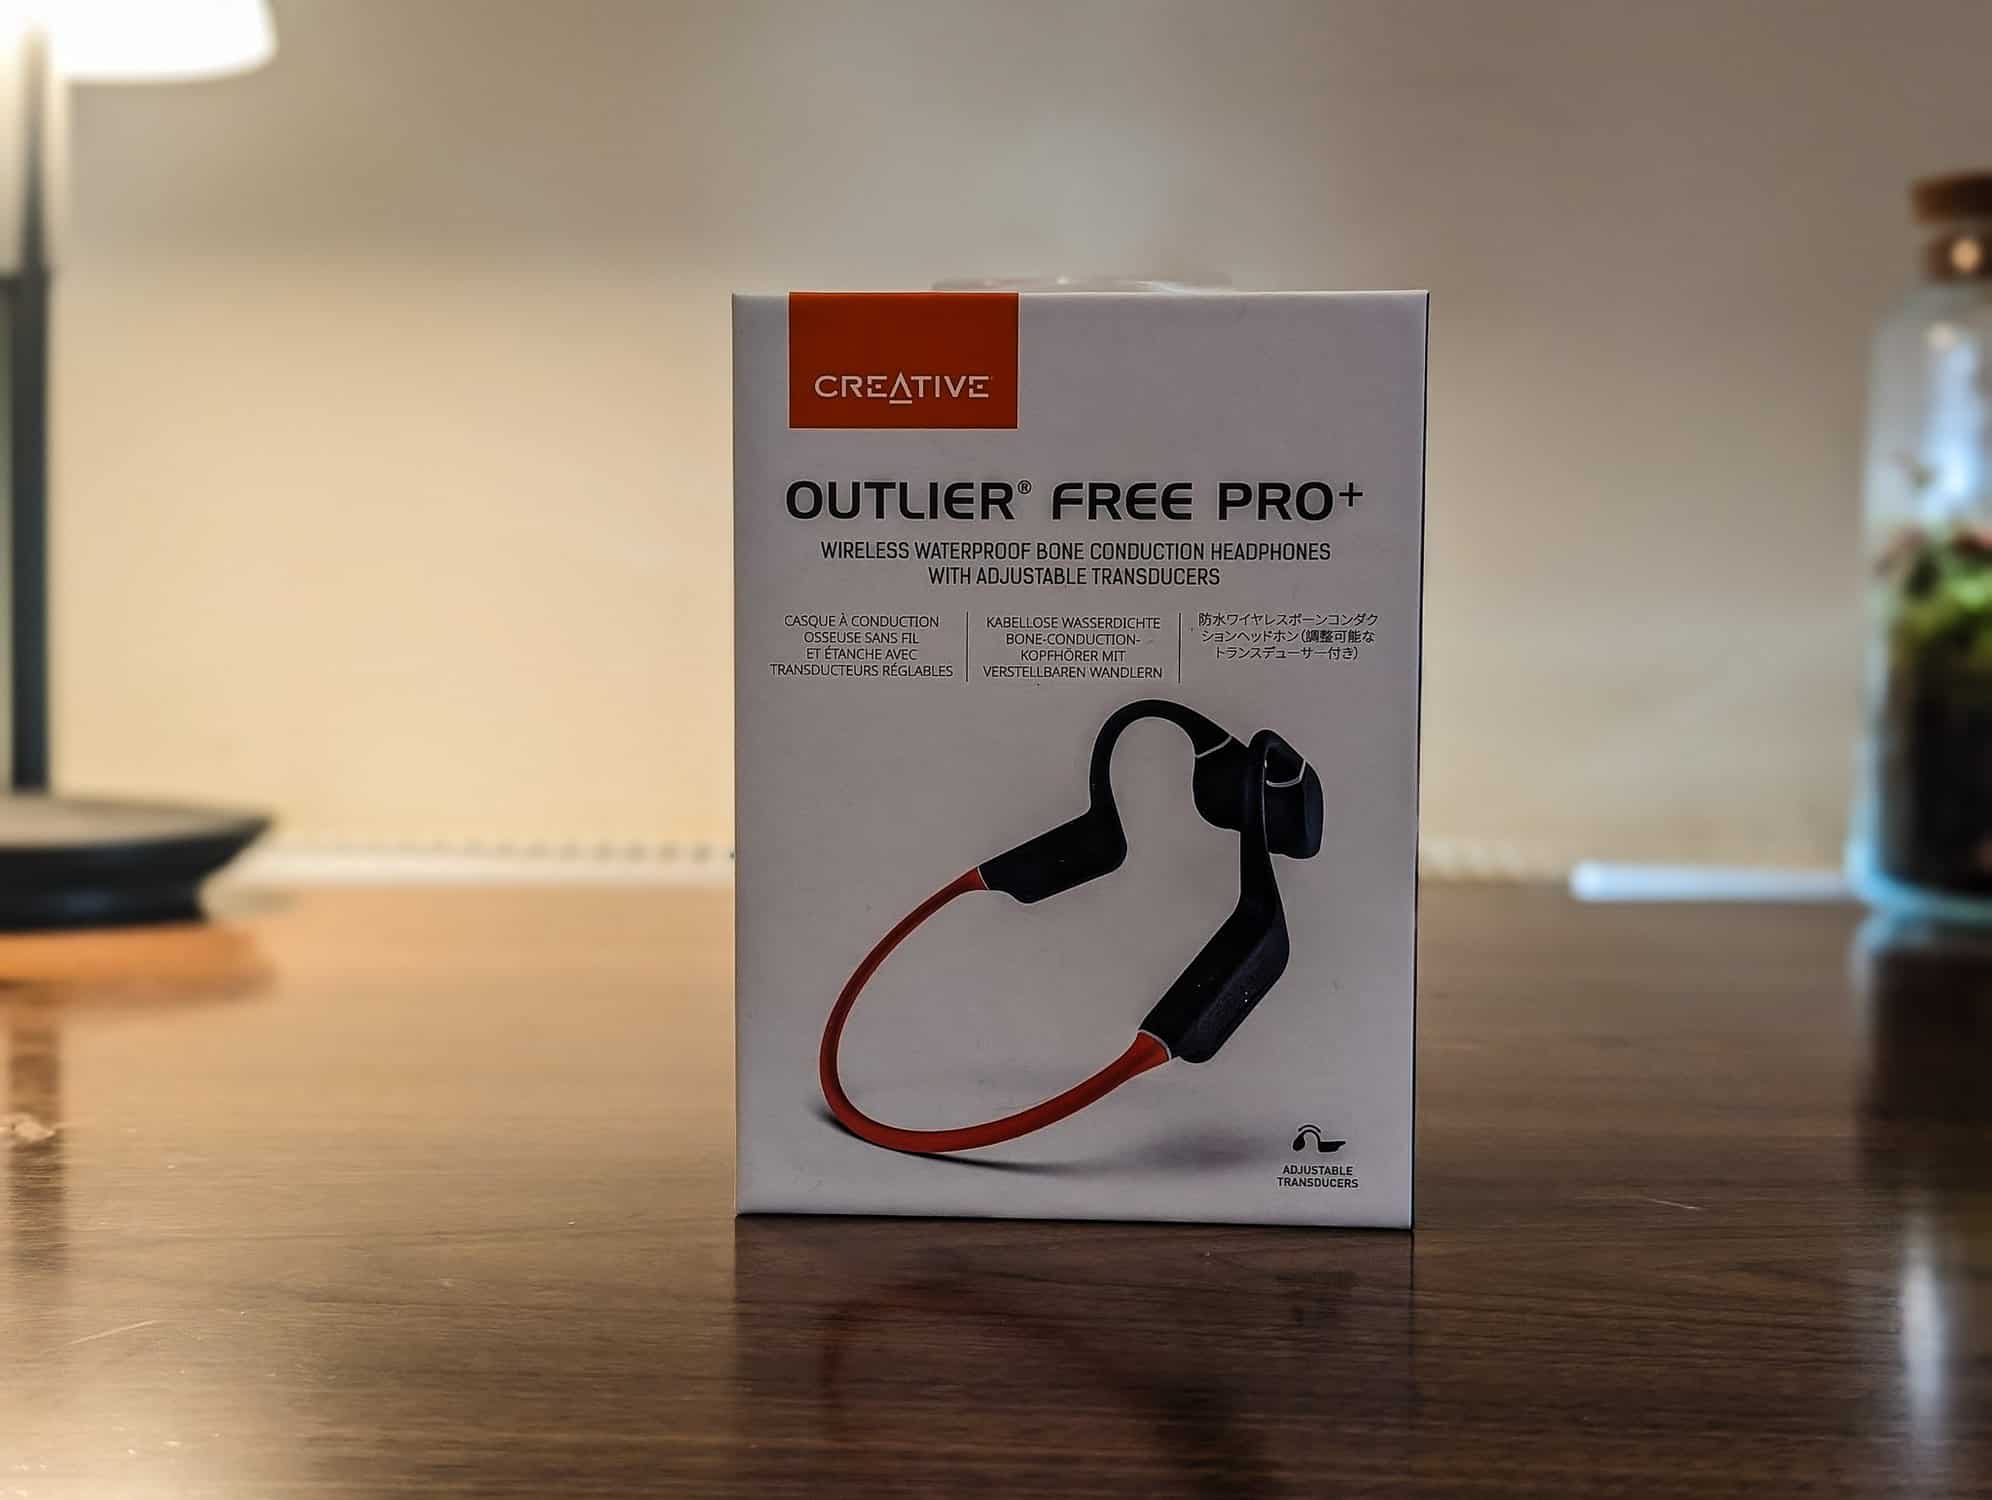 Creative Outlier Free Pro Plus Headphones Review – Are they better than the Shokz OpenSwim bone conduction headphones?